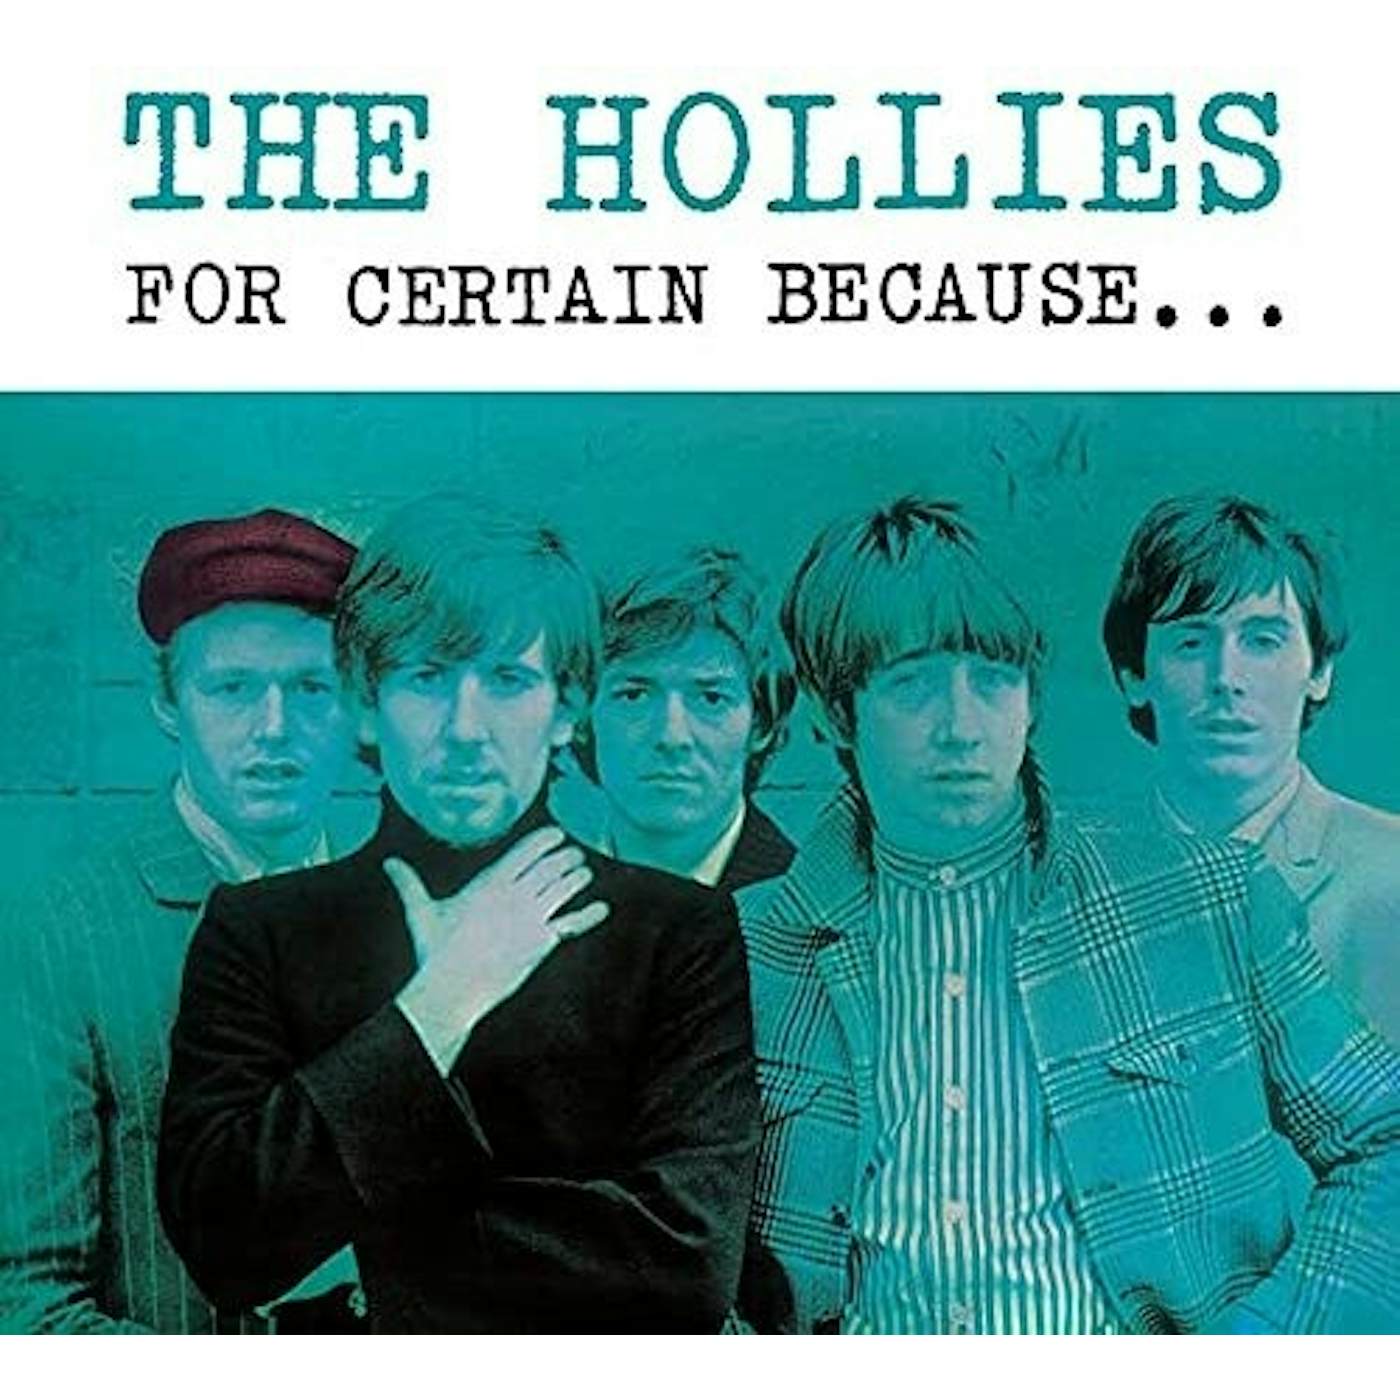 The Hollies FOR CERTAIN BECAUSE Vinyl Record